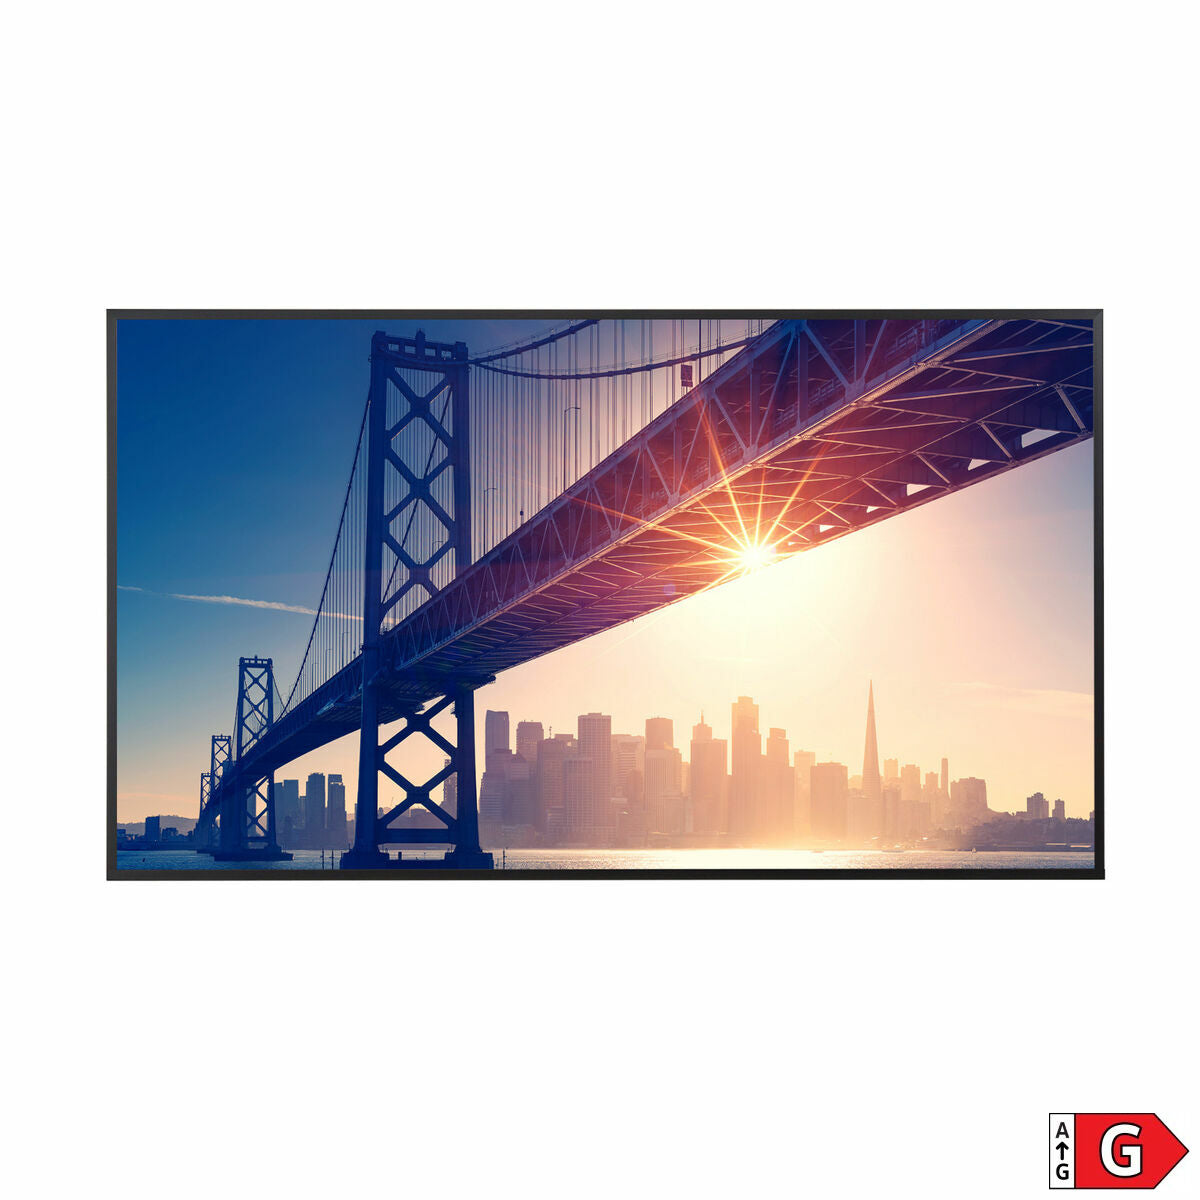 Monitor Videowall NEC ME652 4K Ultra HD 65" 60 Hz, NEC, Computing, monitor-videowall-nec-me652-4k-ultra-hd-65-60-hz, Brand_NEC, category-reference-2609, category-reference-2642, category-reference-2644, category-reference-t-19685, category-reference-t-19902, computers / peripherals, Condition_NEW, office, Price_+ 1000, Teleworking, RiotNook